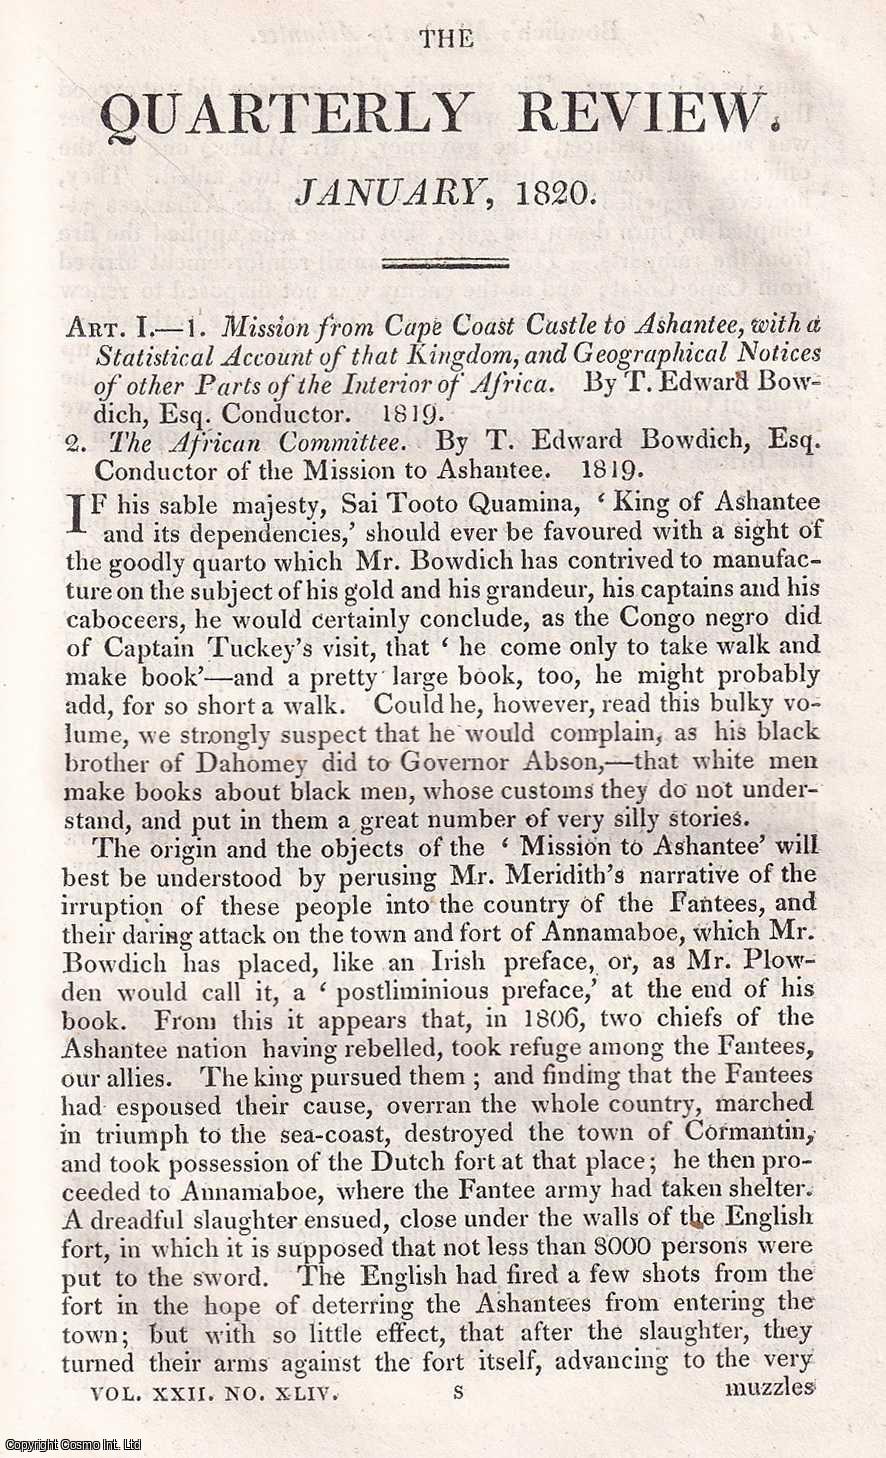 John Barrow - Bowdich's Mission to Ashantee; including details of the African slave trade, etc. An uncommon original article from The Quarterly Review, 1820.